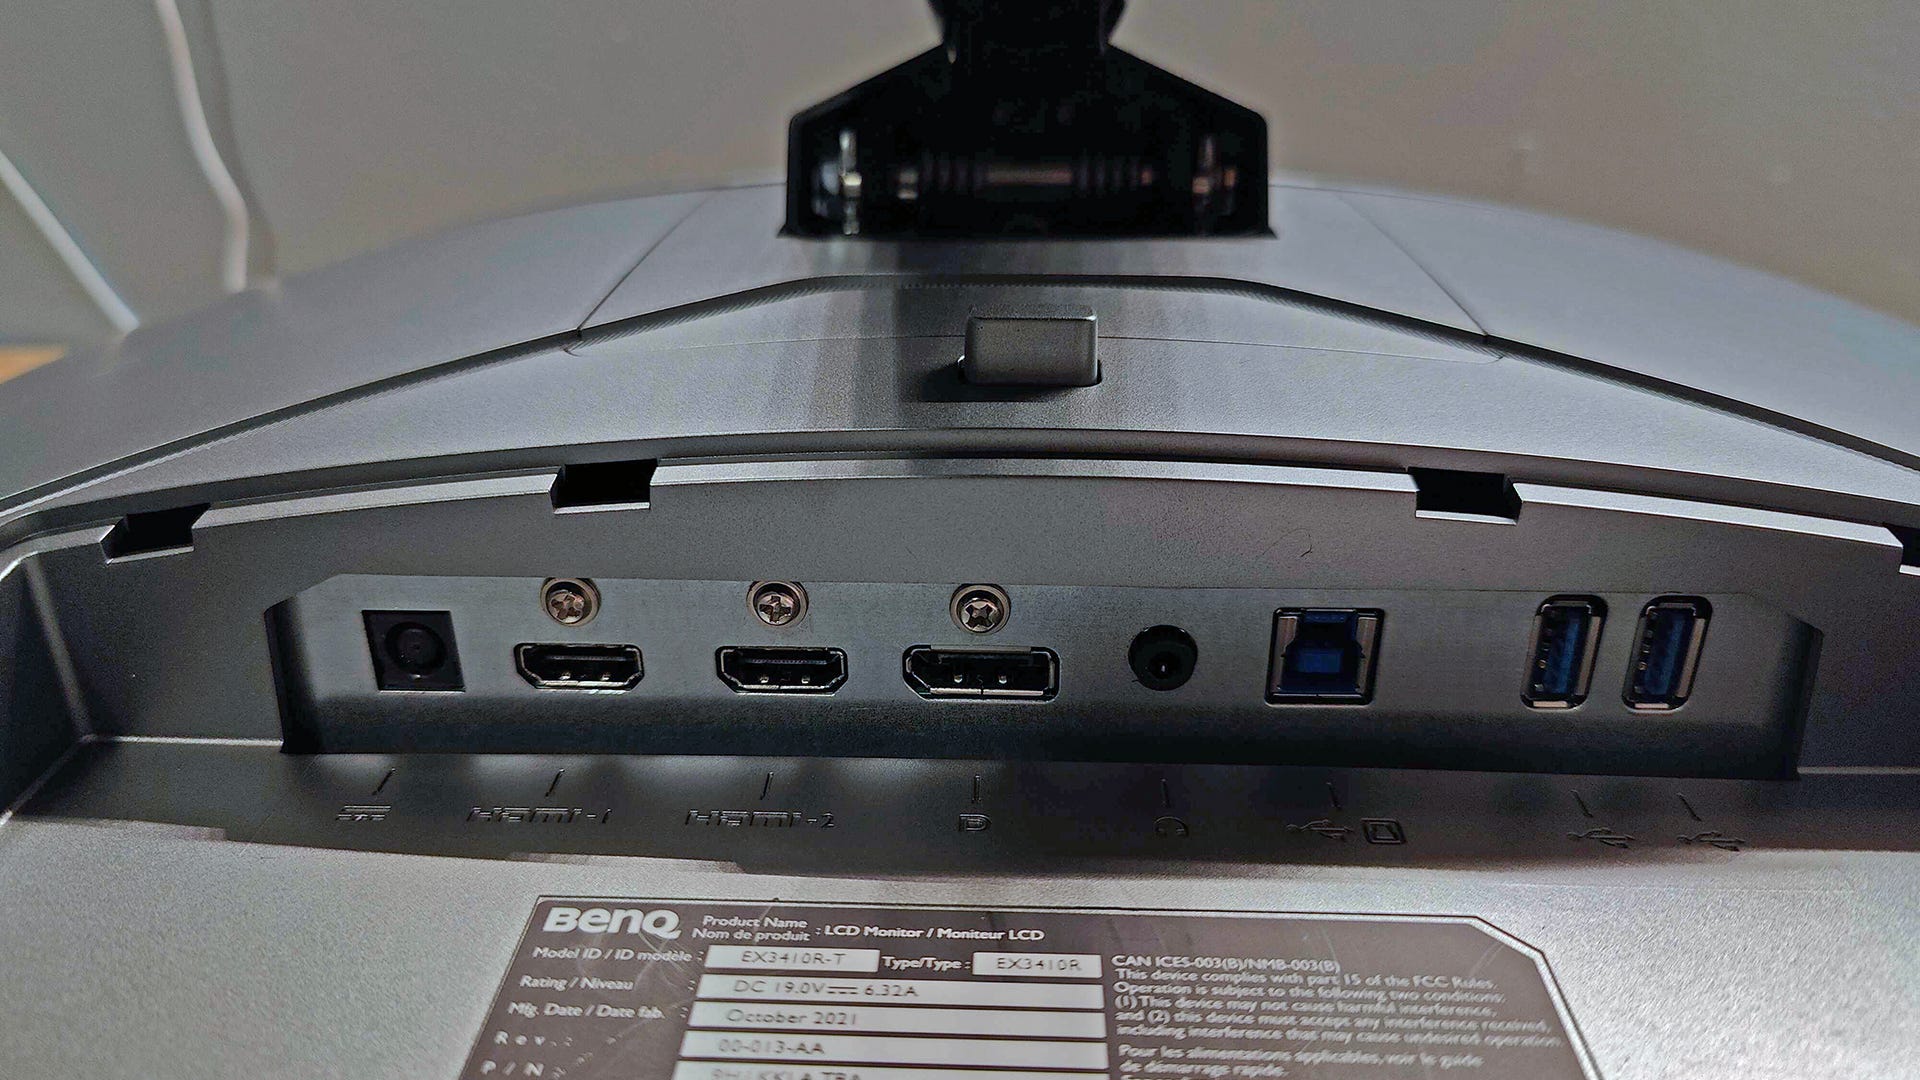 A closeup of two multiple USB ports, an HDMI port, and a DisplayPort 